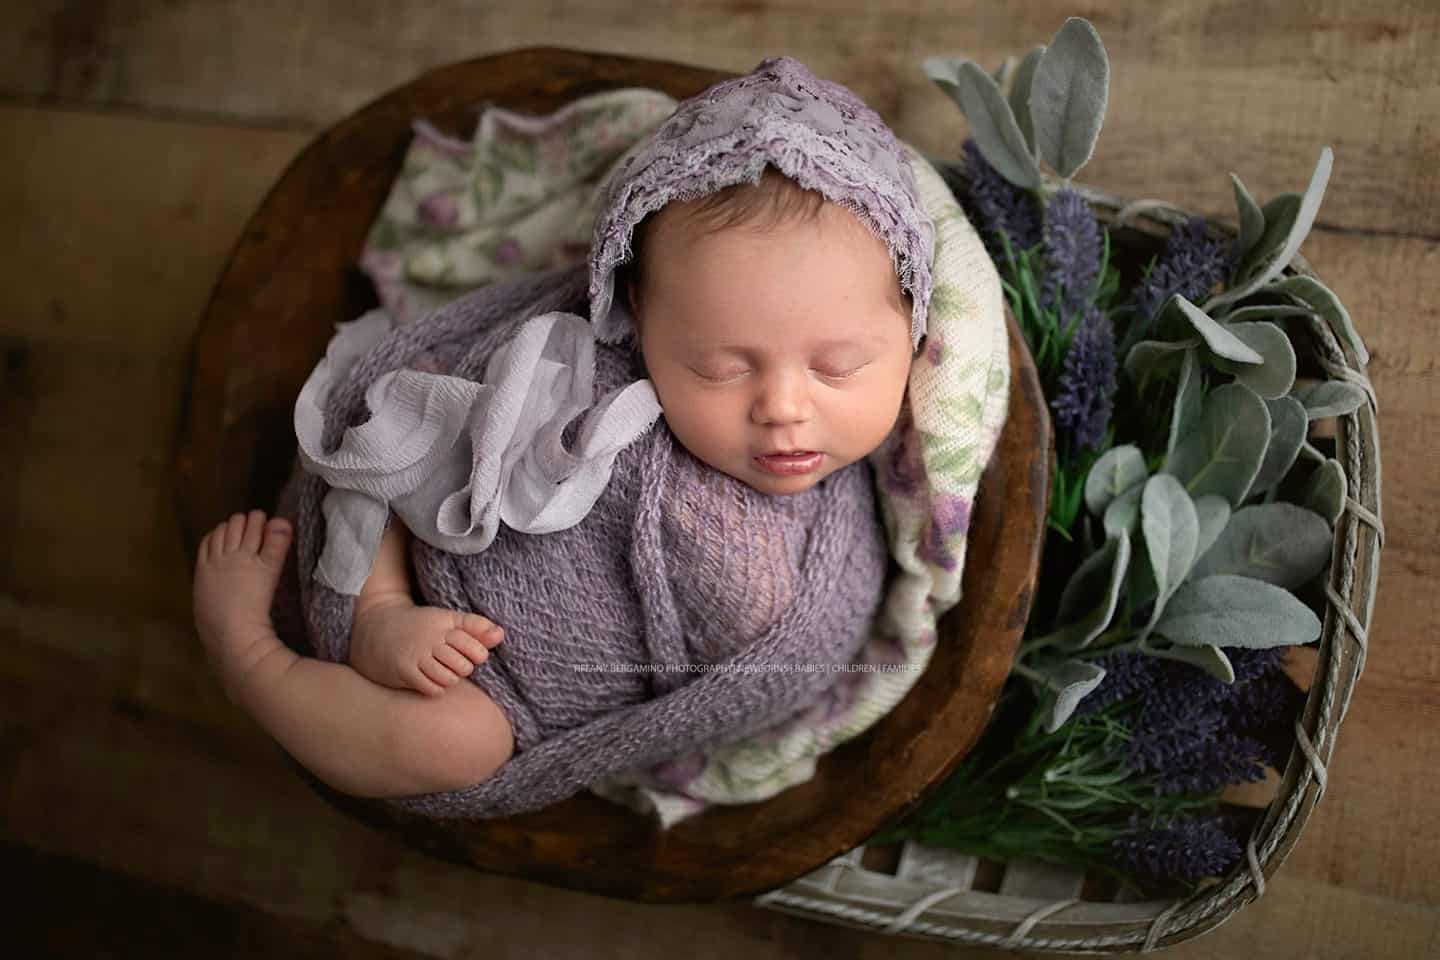 bowls and baskets as newborn photography props